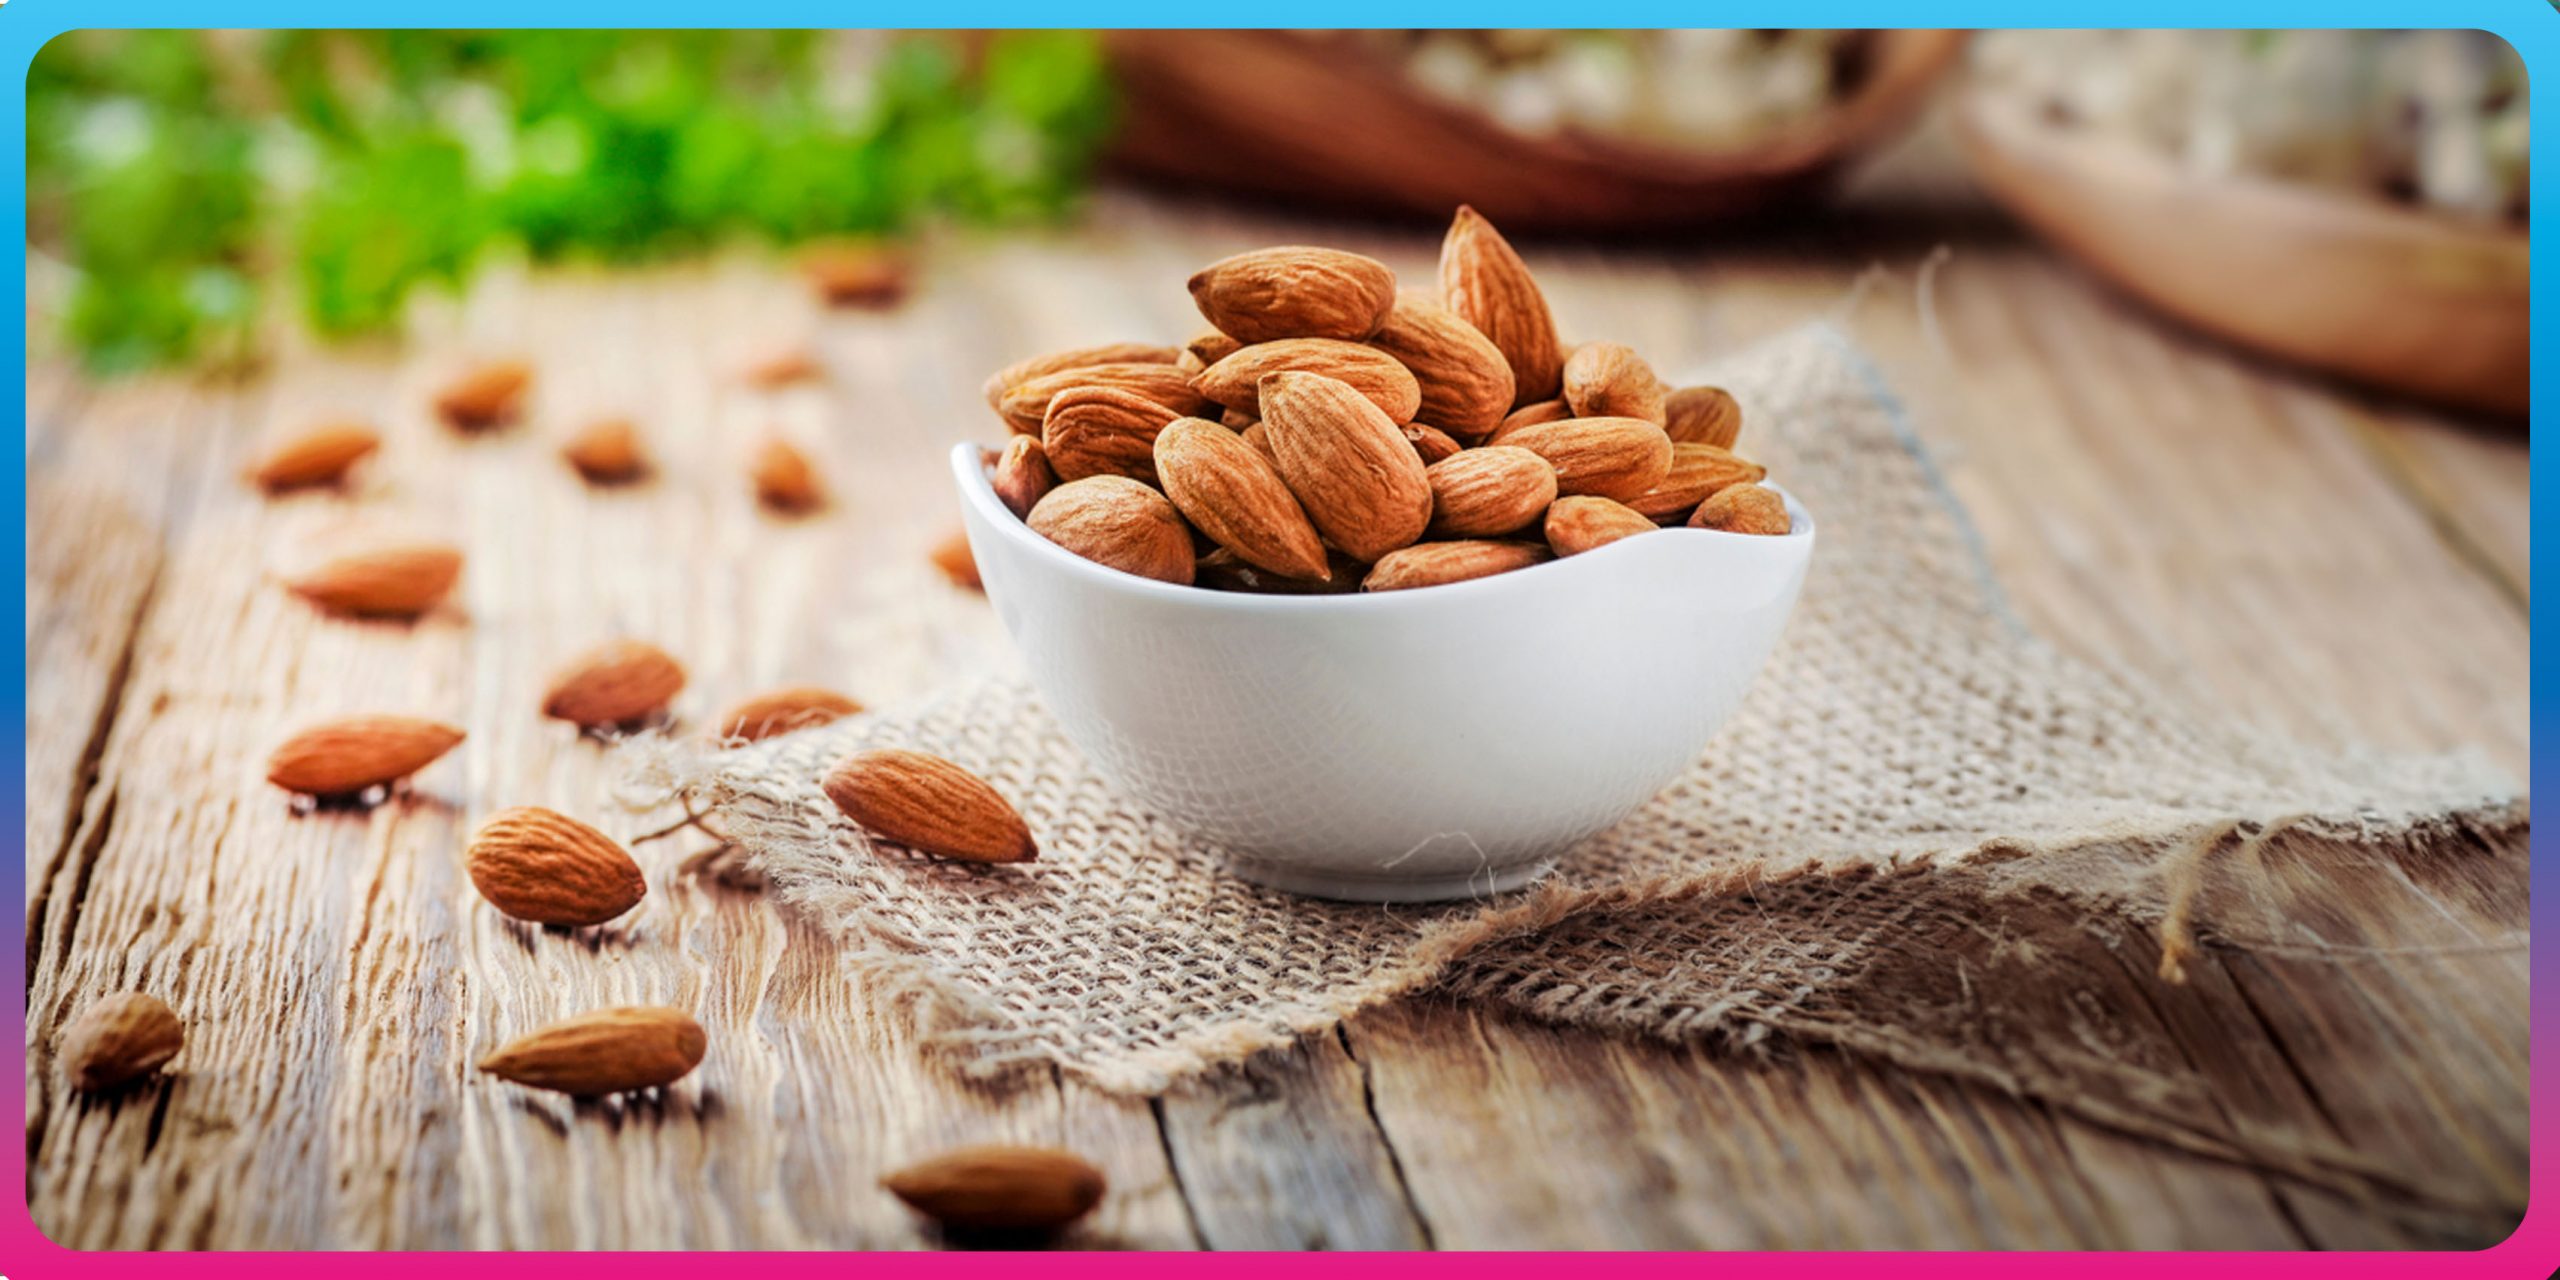 Is Almonds good for Diabetes